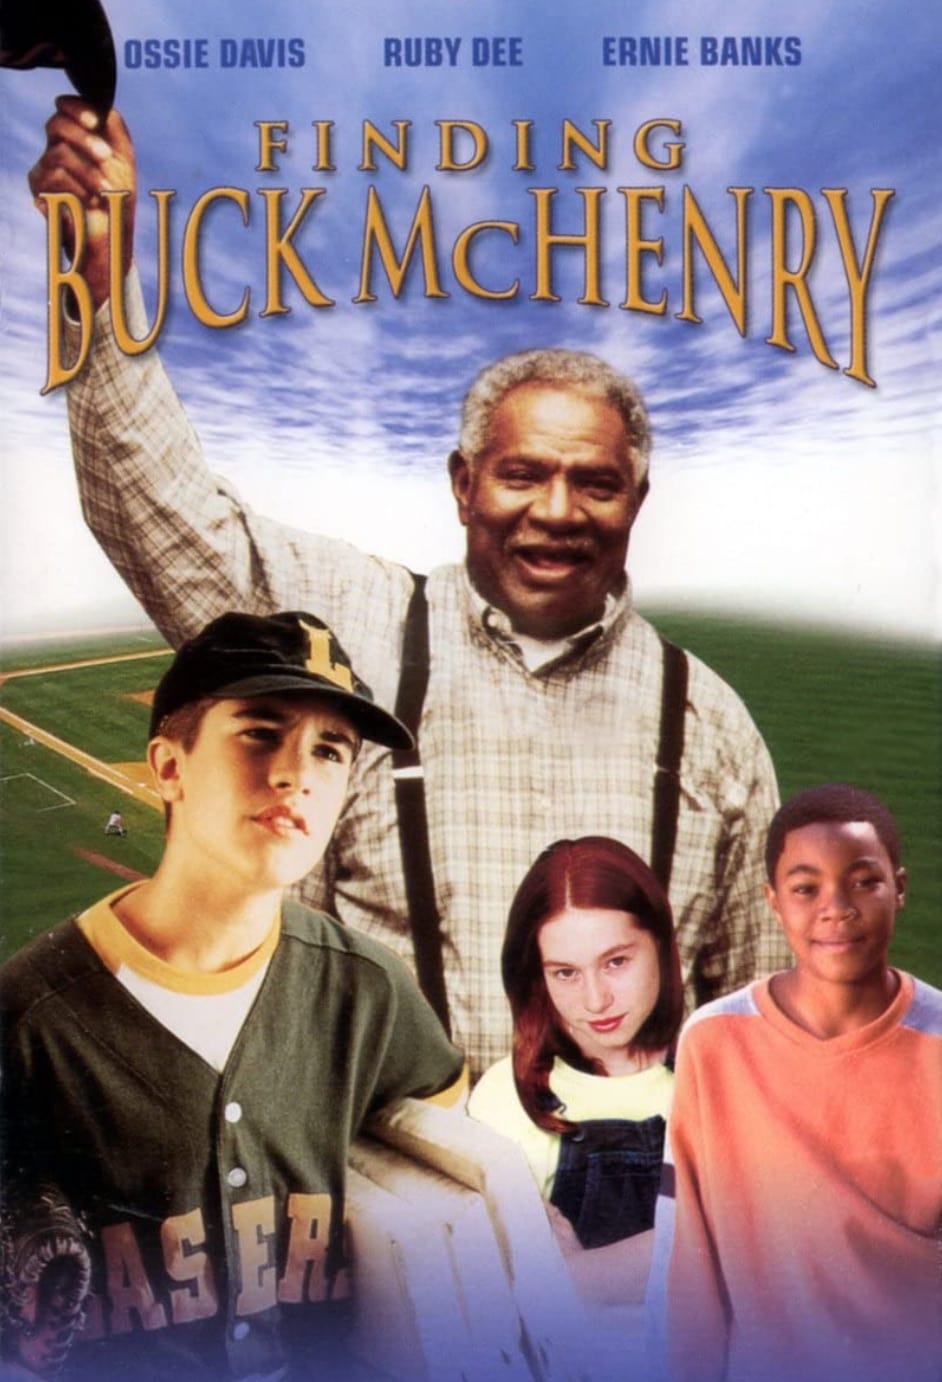 Finding Buck McHenry (2000)